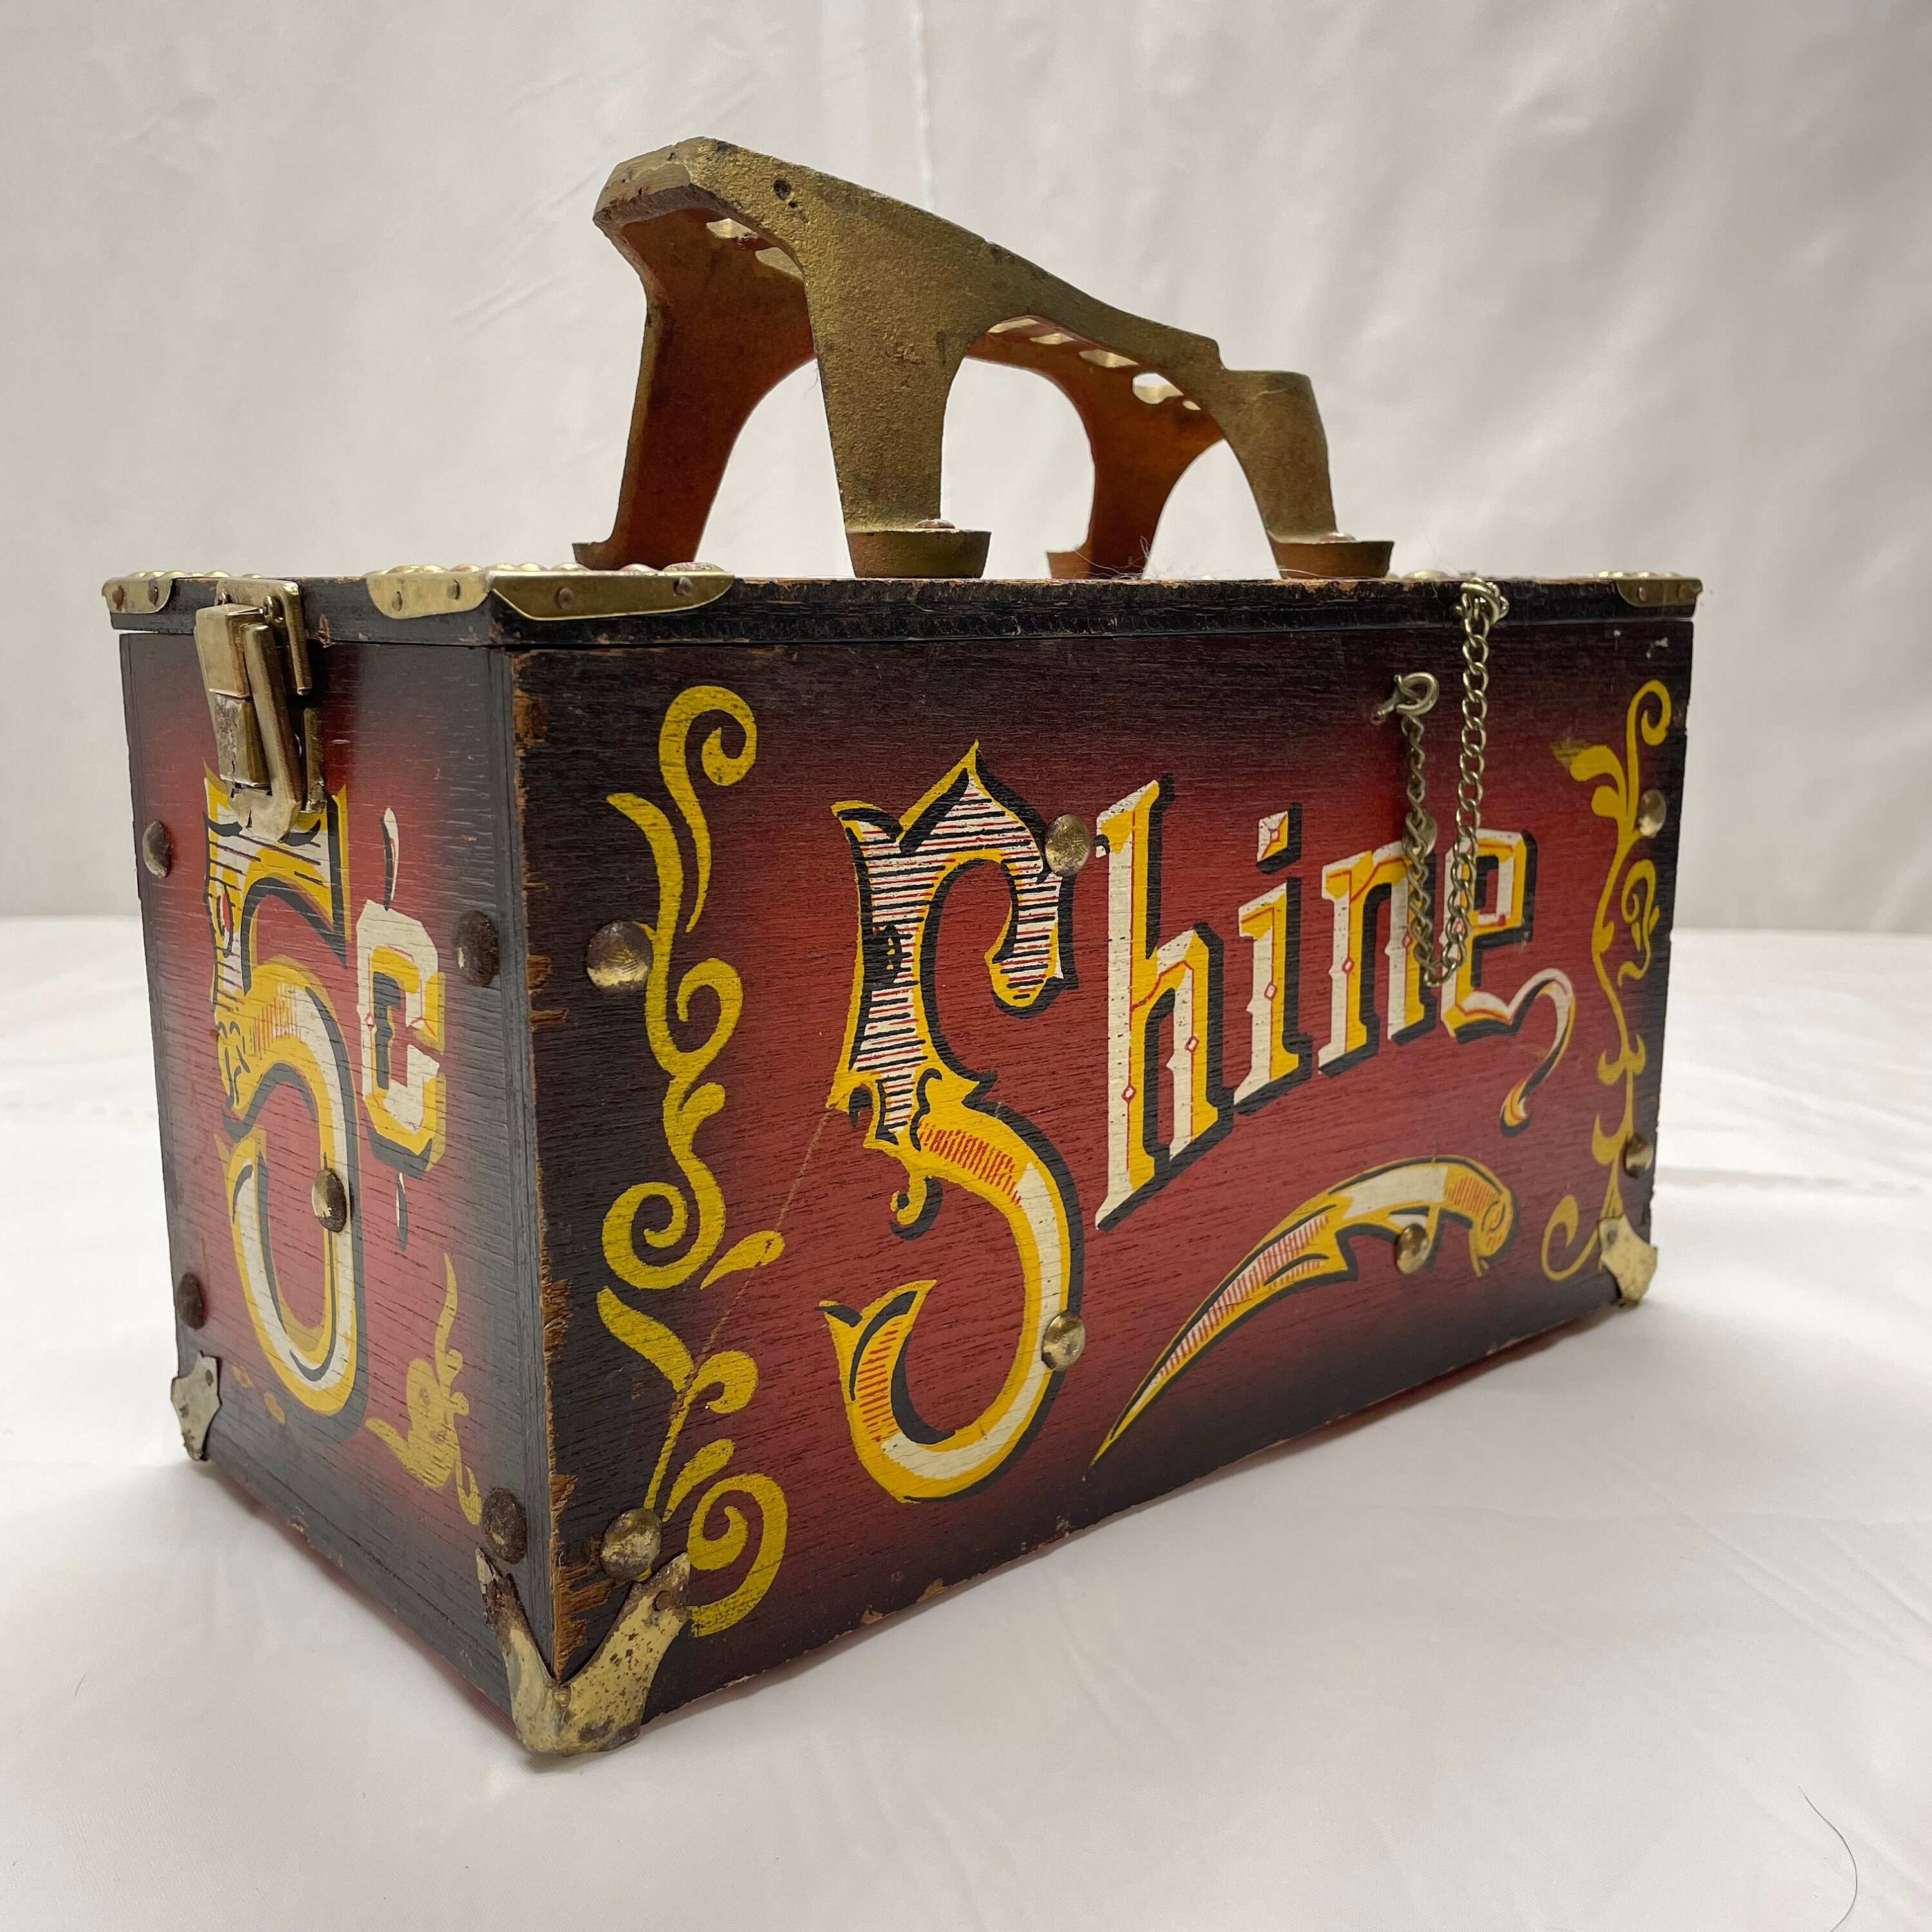 AMERICAN MADE VINTAGE STYLED 5 CENT SHOESHINE BOX